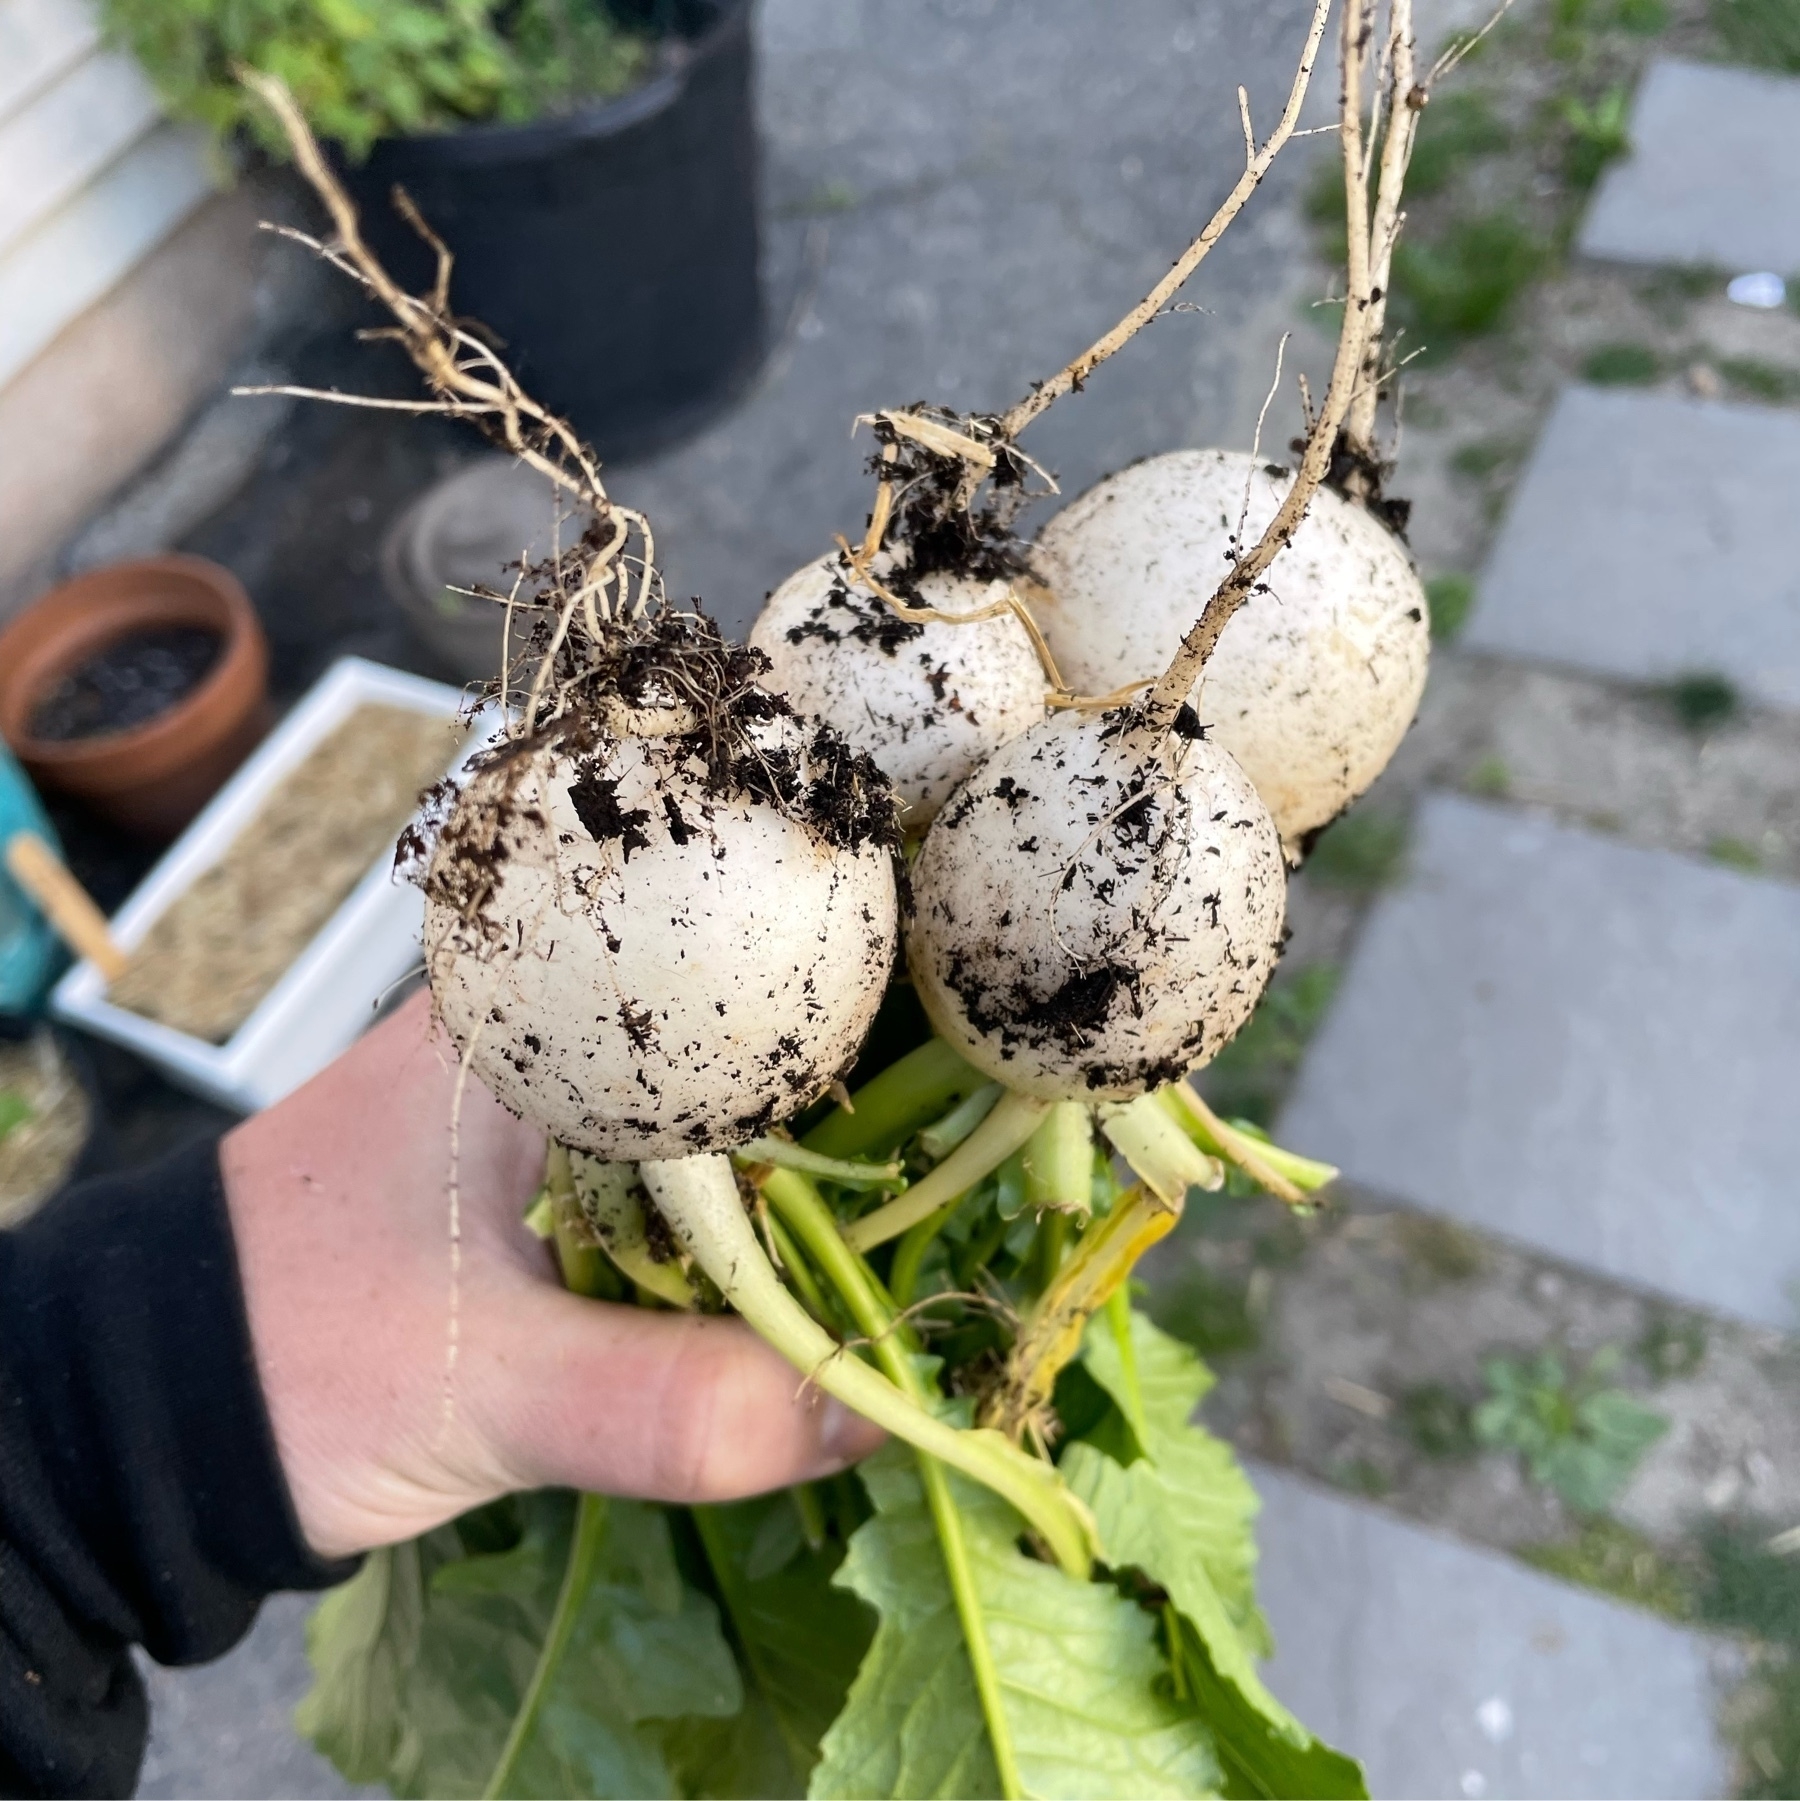 hand holding a bundle of 4 haleuri turnips with dirt and greens still present.